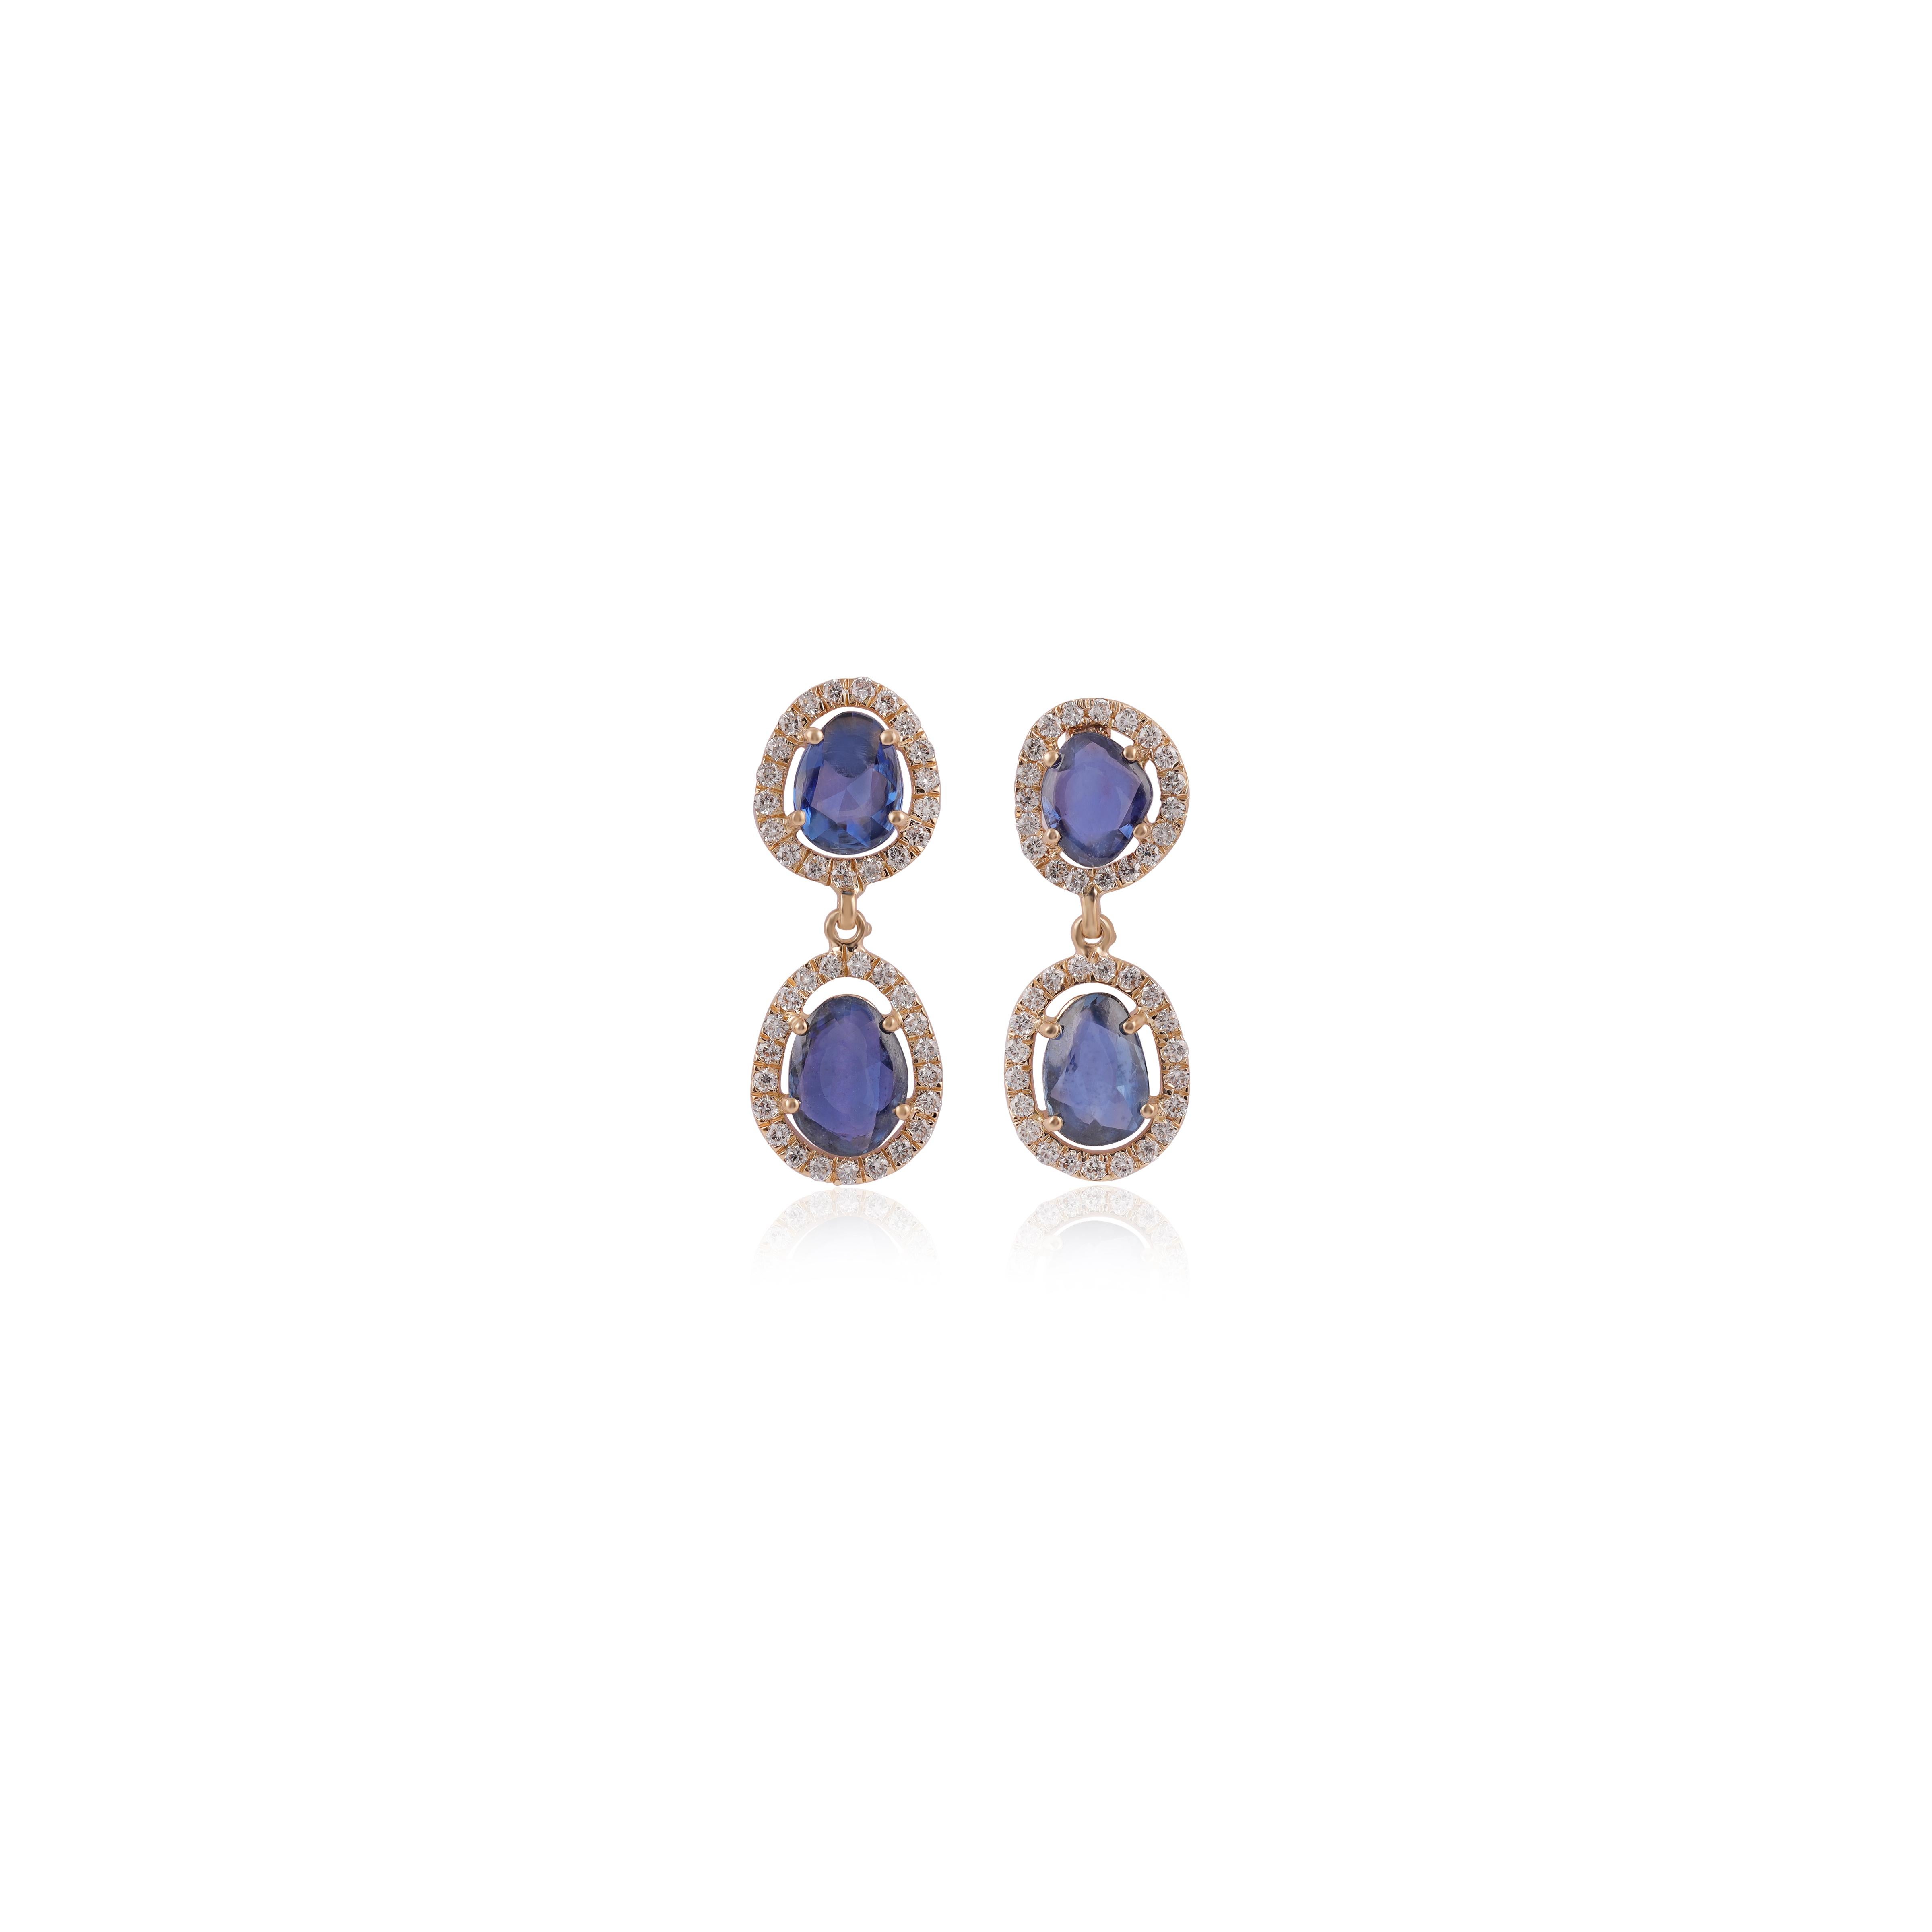 An exclusive pair of earrings with rose cut blue sapphire 4.03 carat in the cluster with a round-shaped diamond 0.65 carat studded in 18K Yellow gold 3.69 grams with a simple pull-push mechanism. These are elegant & wearable earrings.

